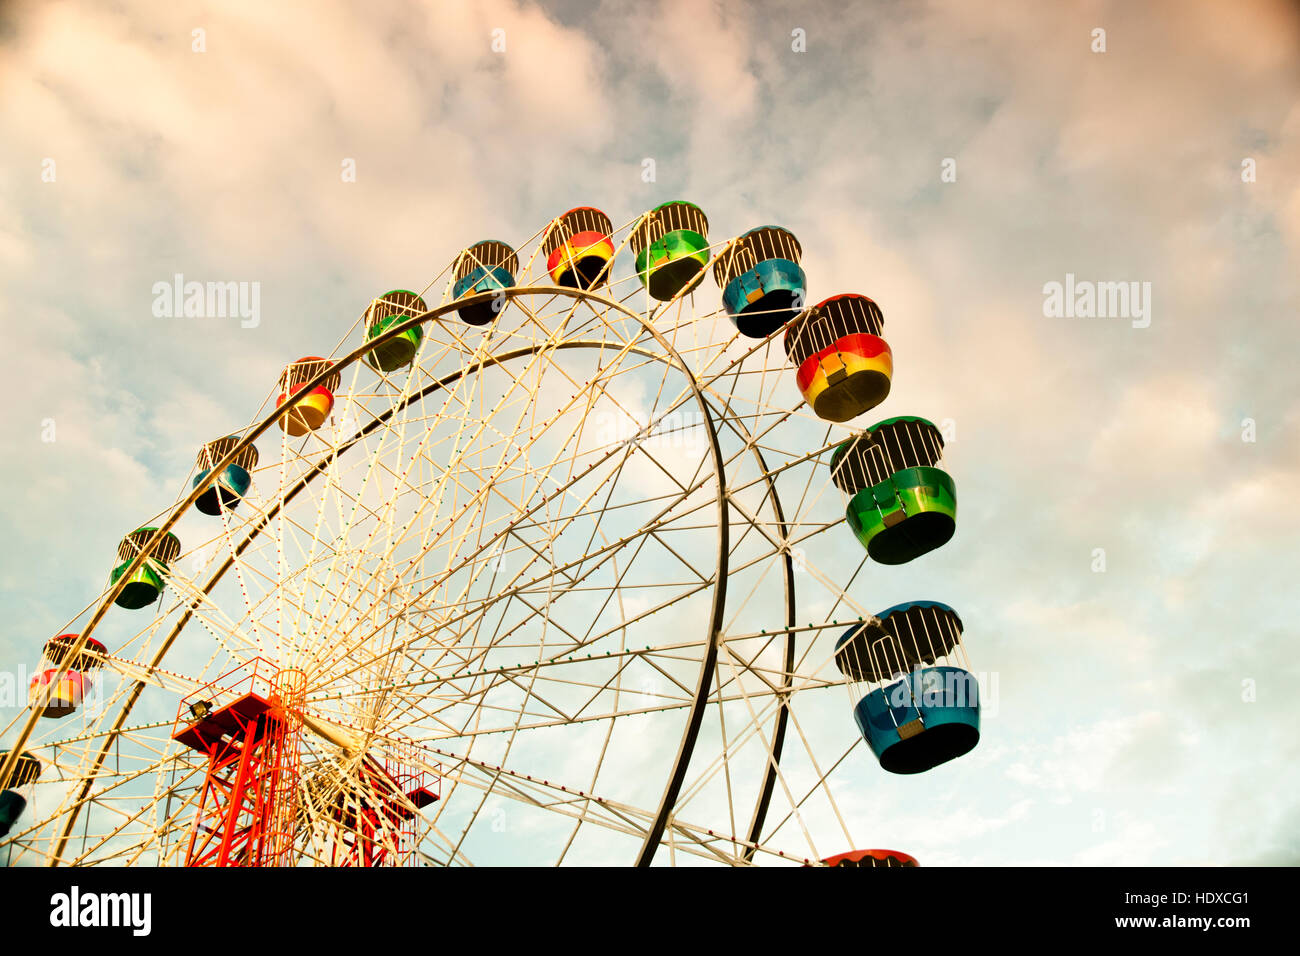 Colorful ferris wheel in sunset with cloudy sky Stock Photo